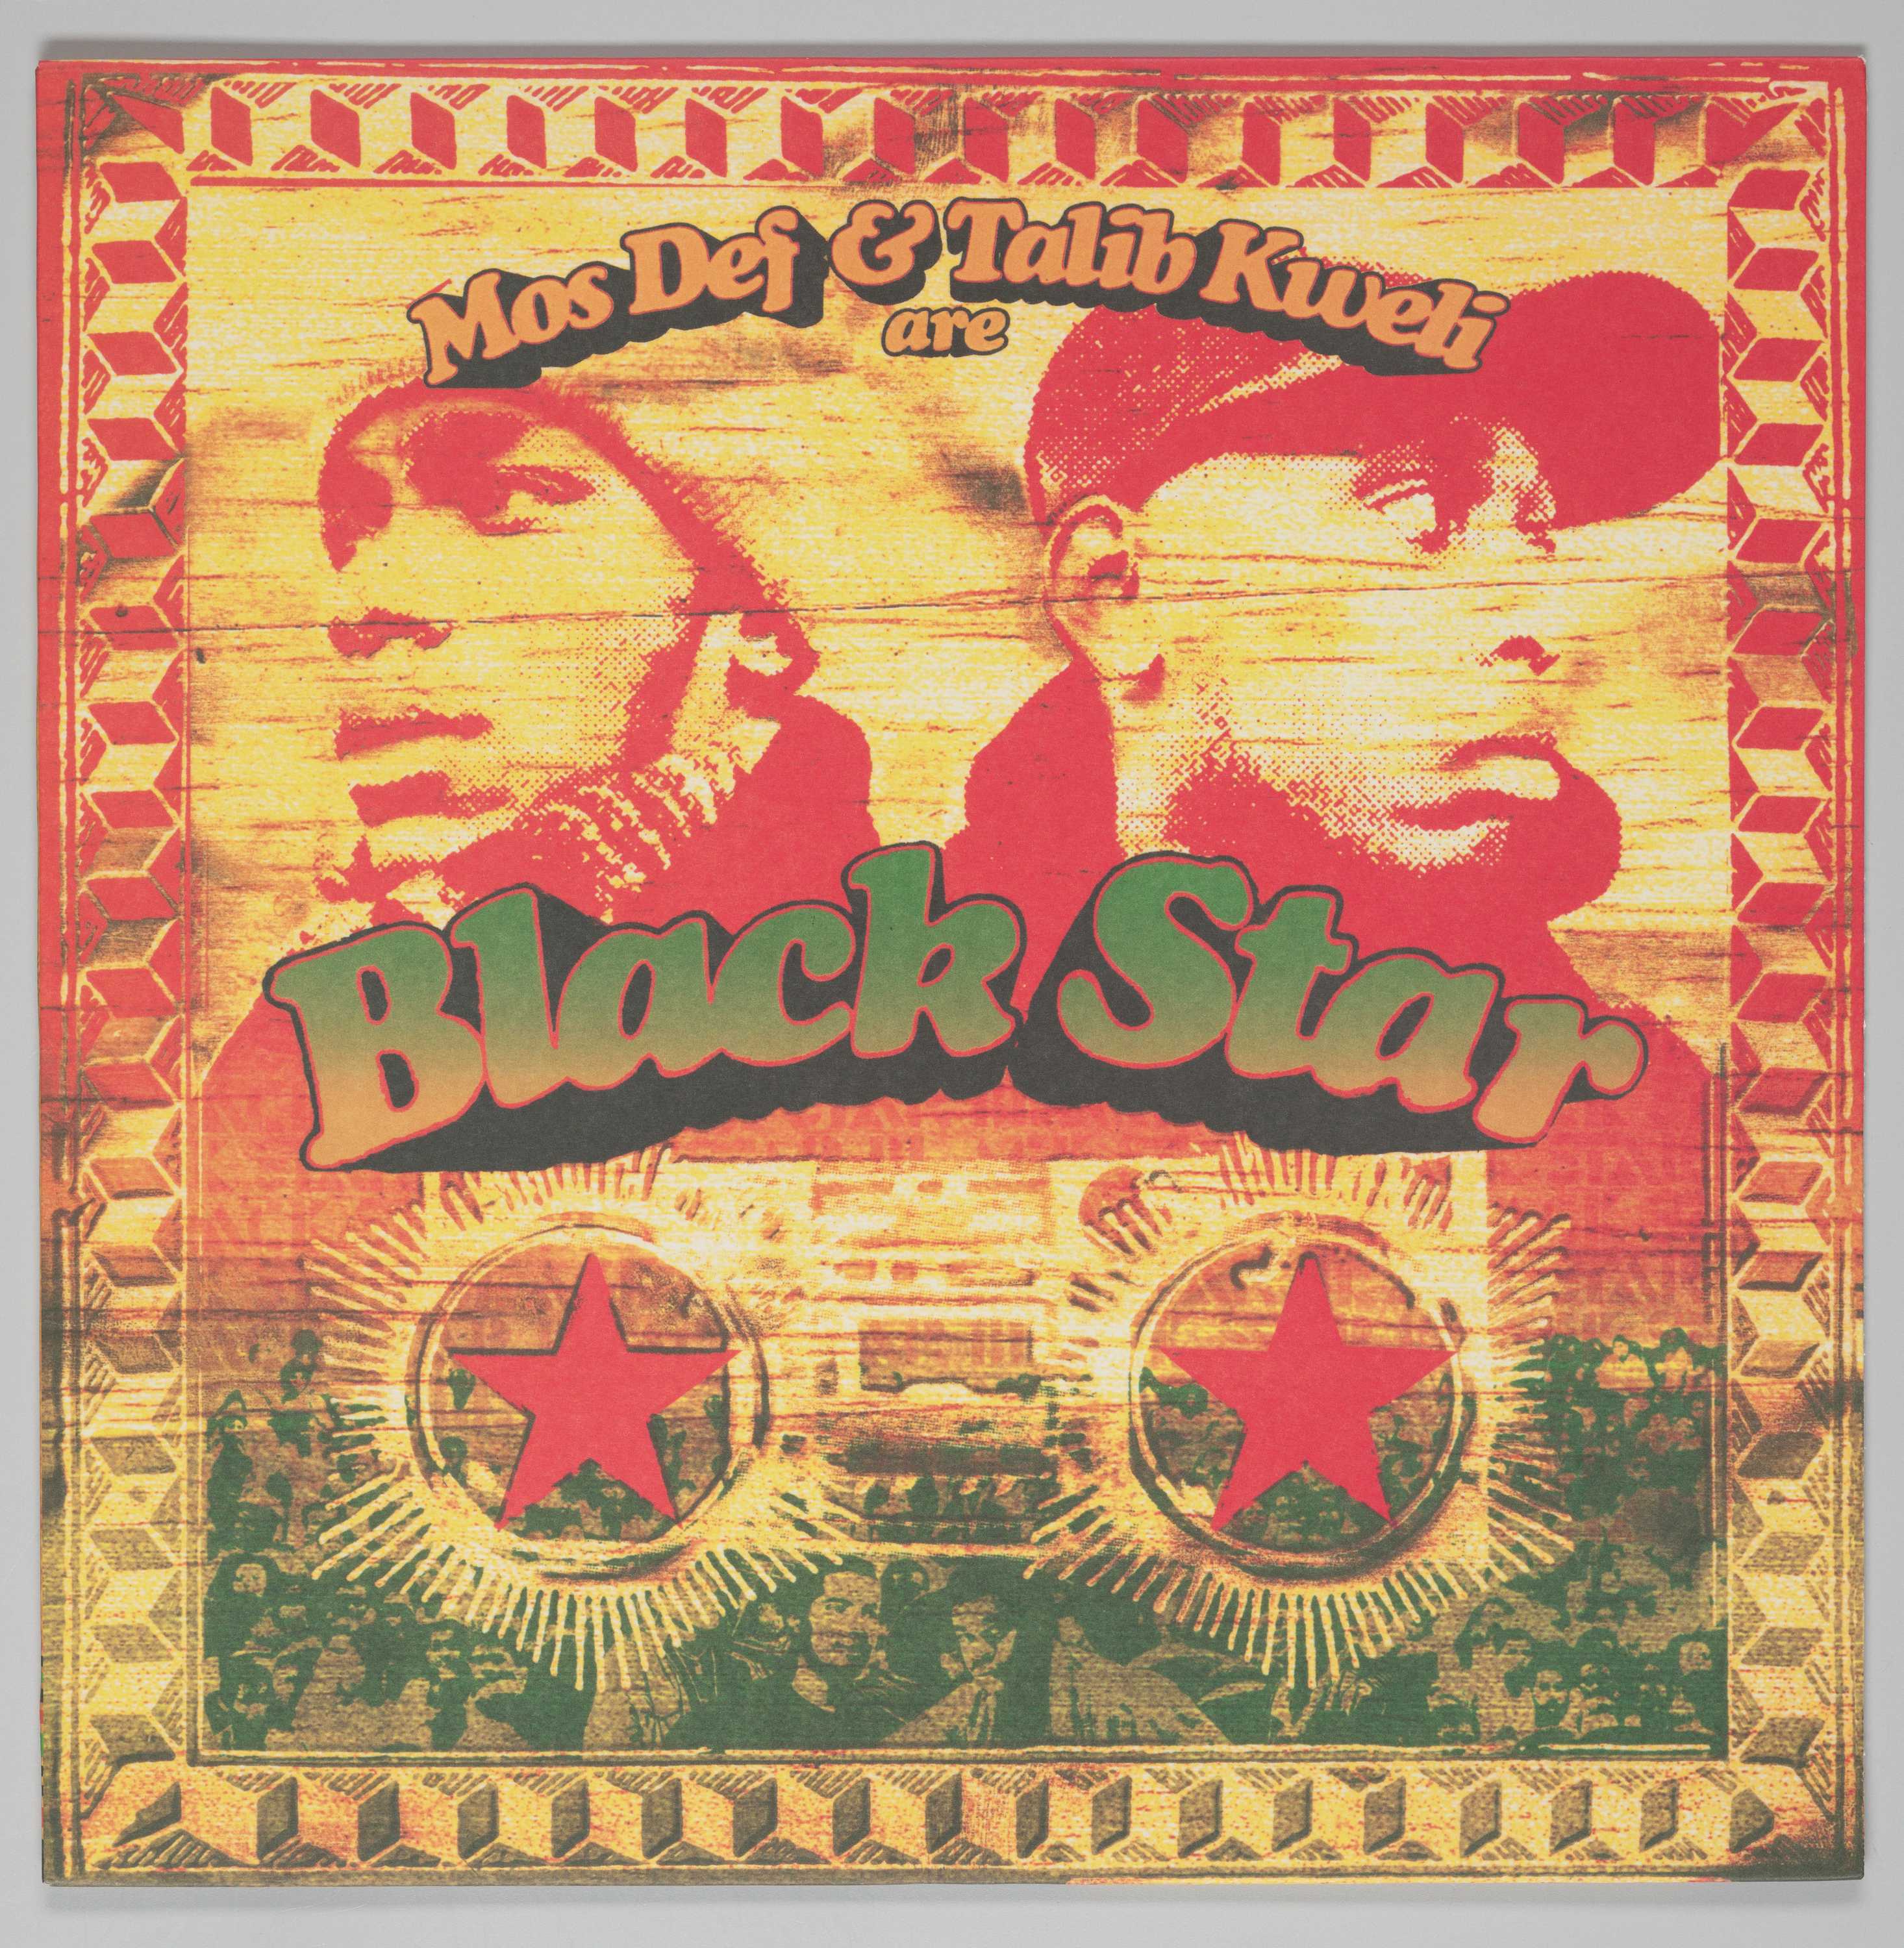 Black Star record album by Yasiin Bey (Mos Def) and Talib Kweli pictured on cover